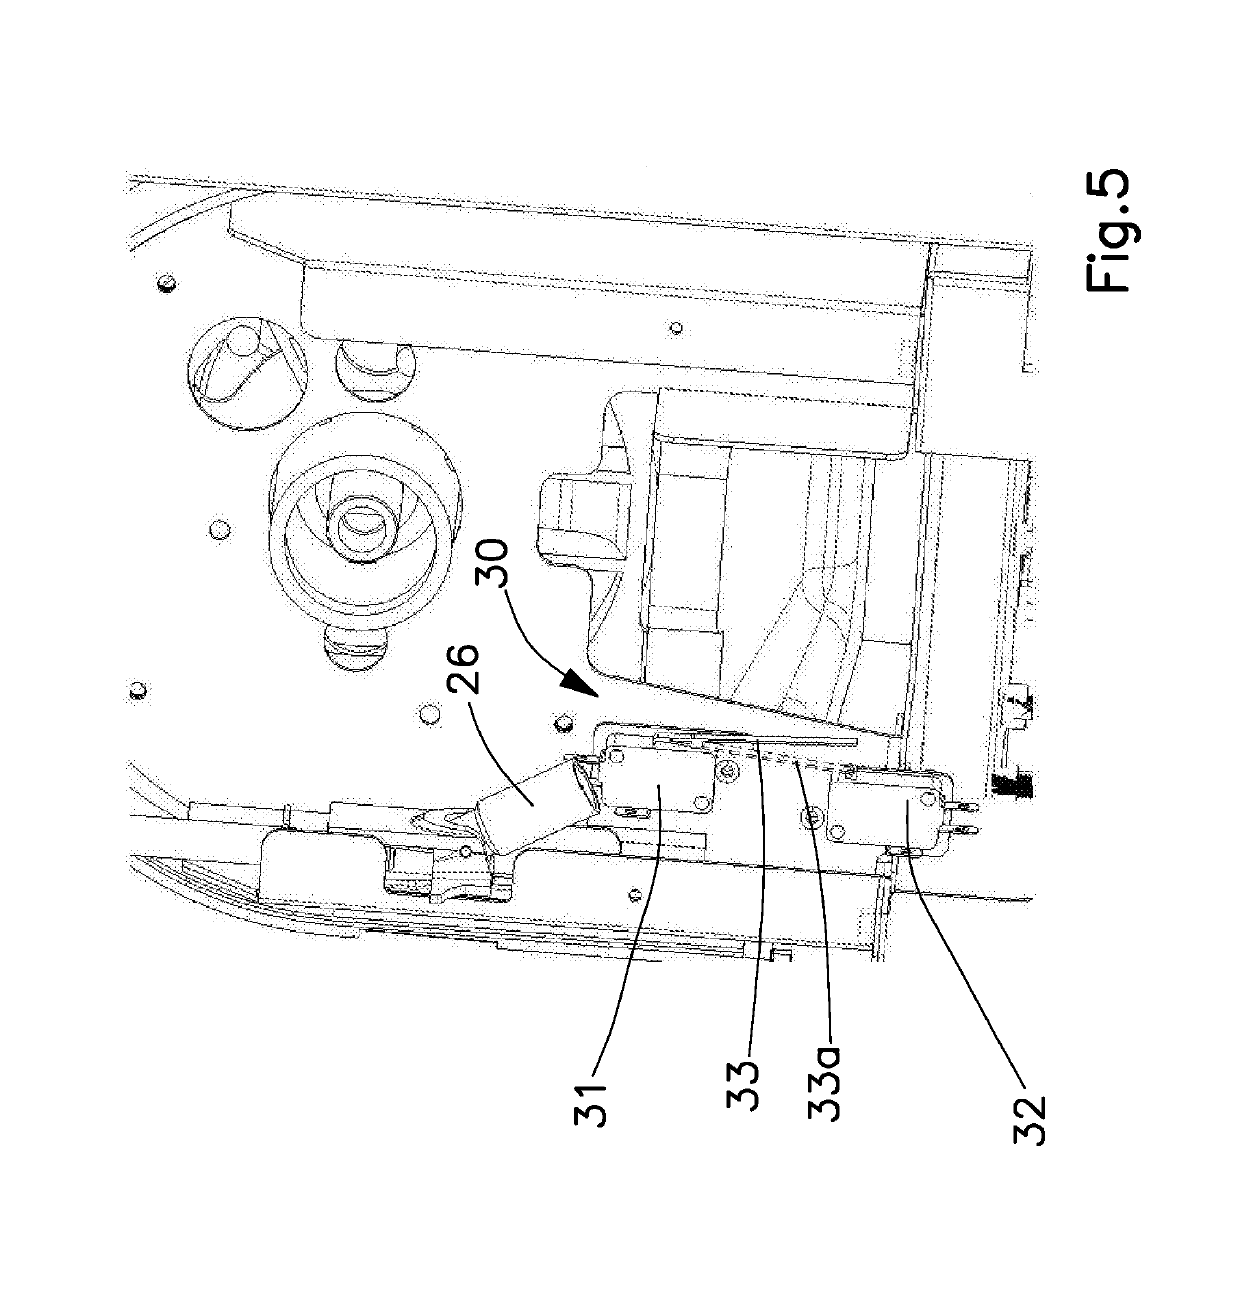 Apparatus for preparing and dispensing food products